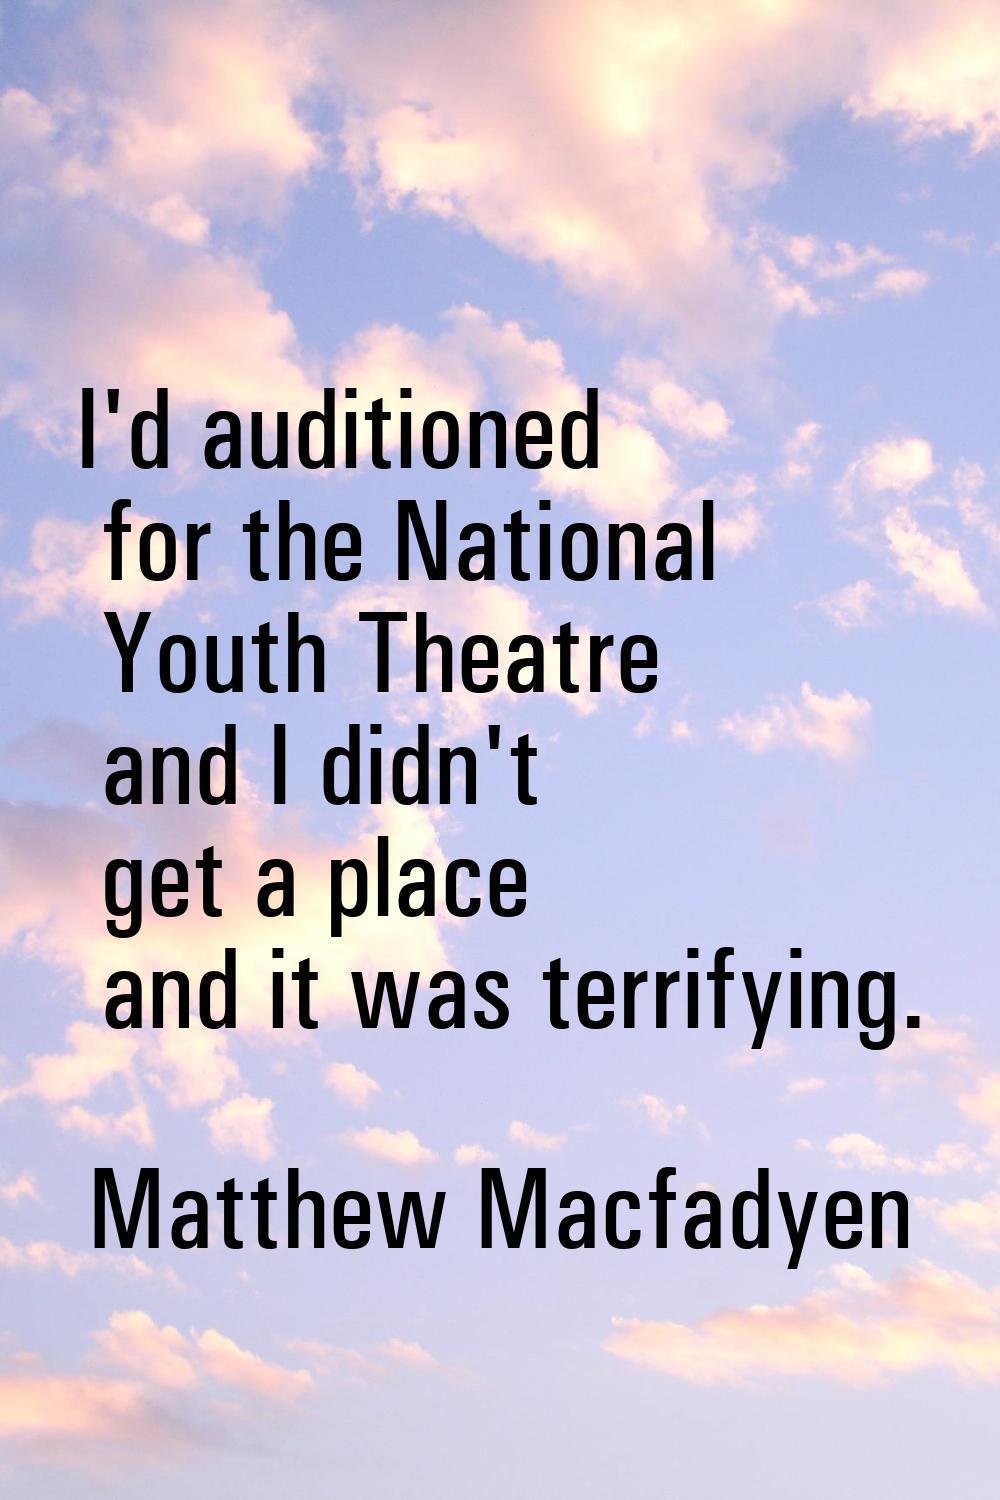 I'd auditioned for the National Youth Theatre and I didn't get a place and it was terrifying.